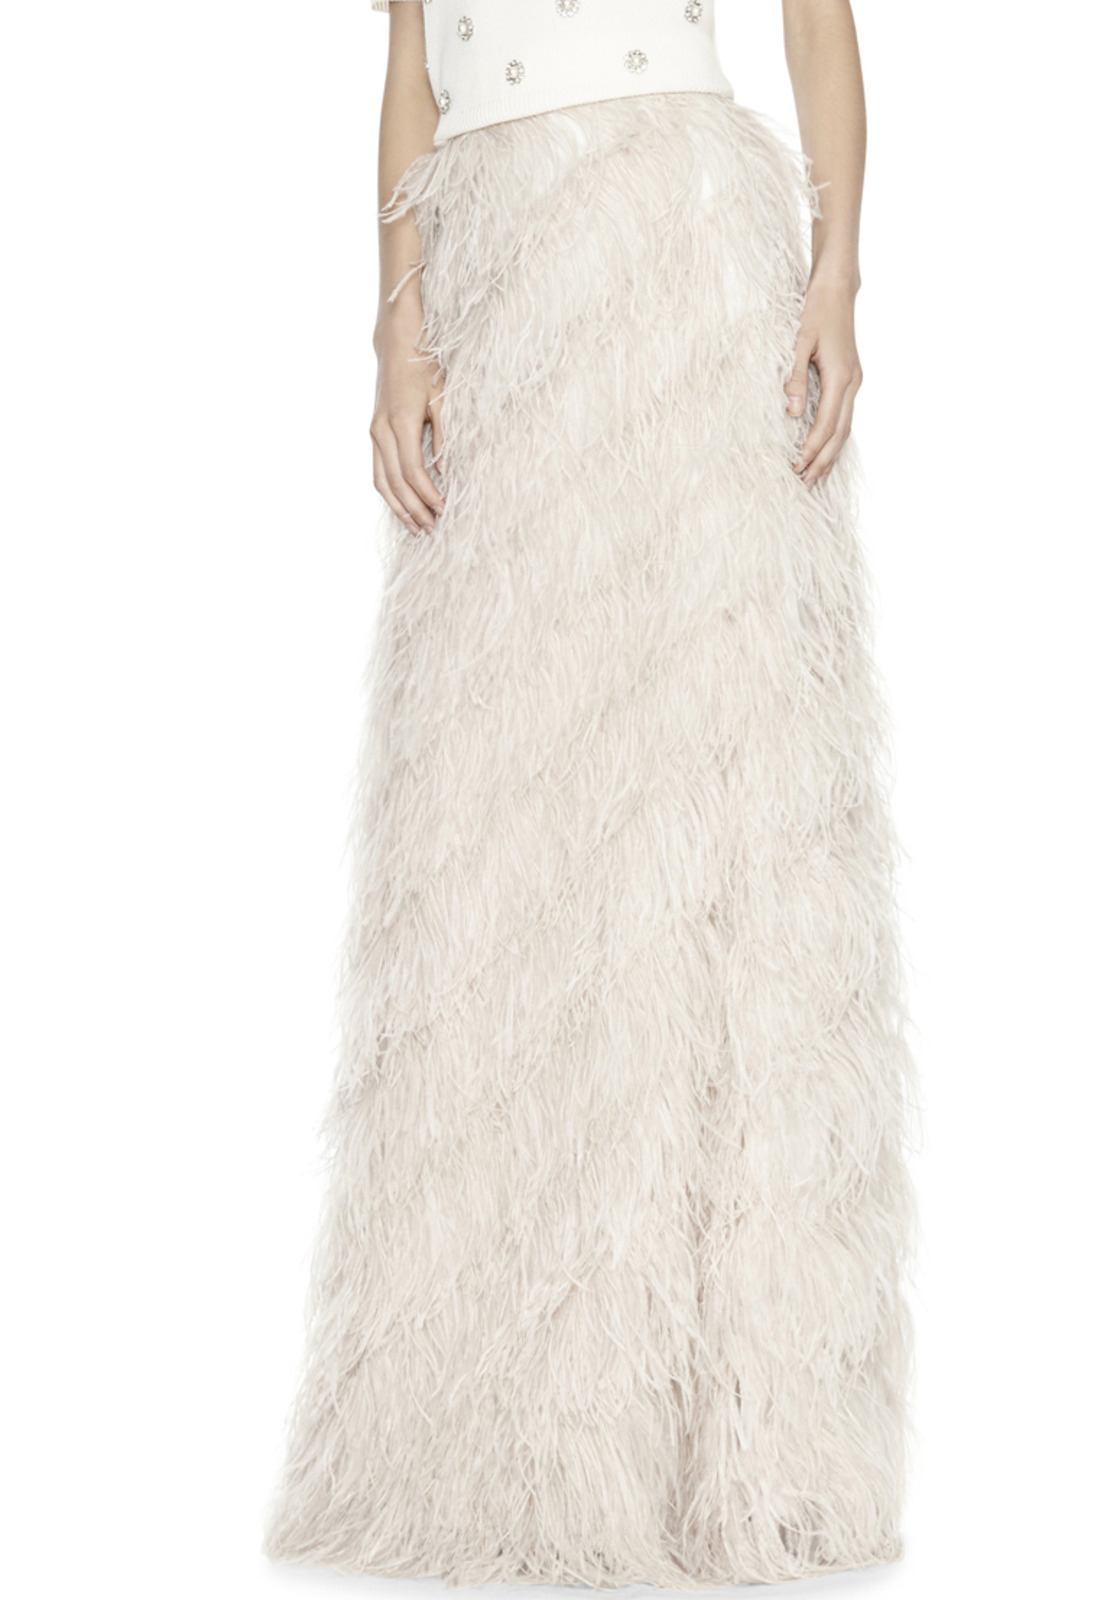 Alice + olivia Sherelle Ostrich Feather Skirt in Natural | Lyst